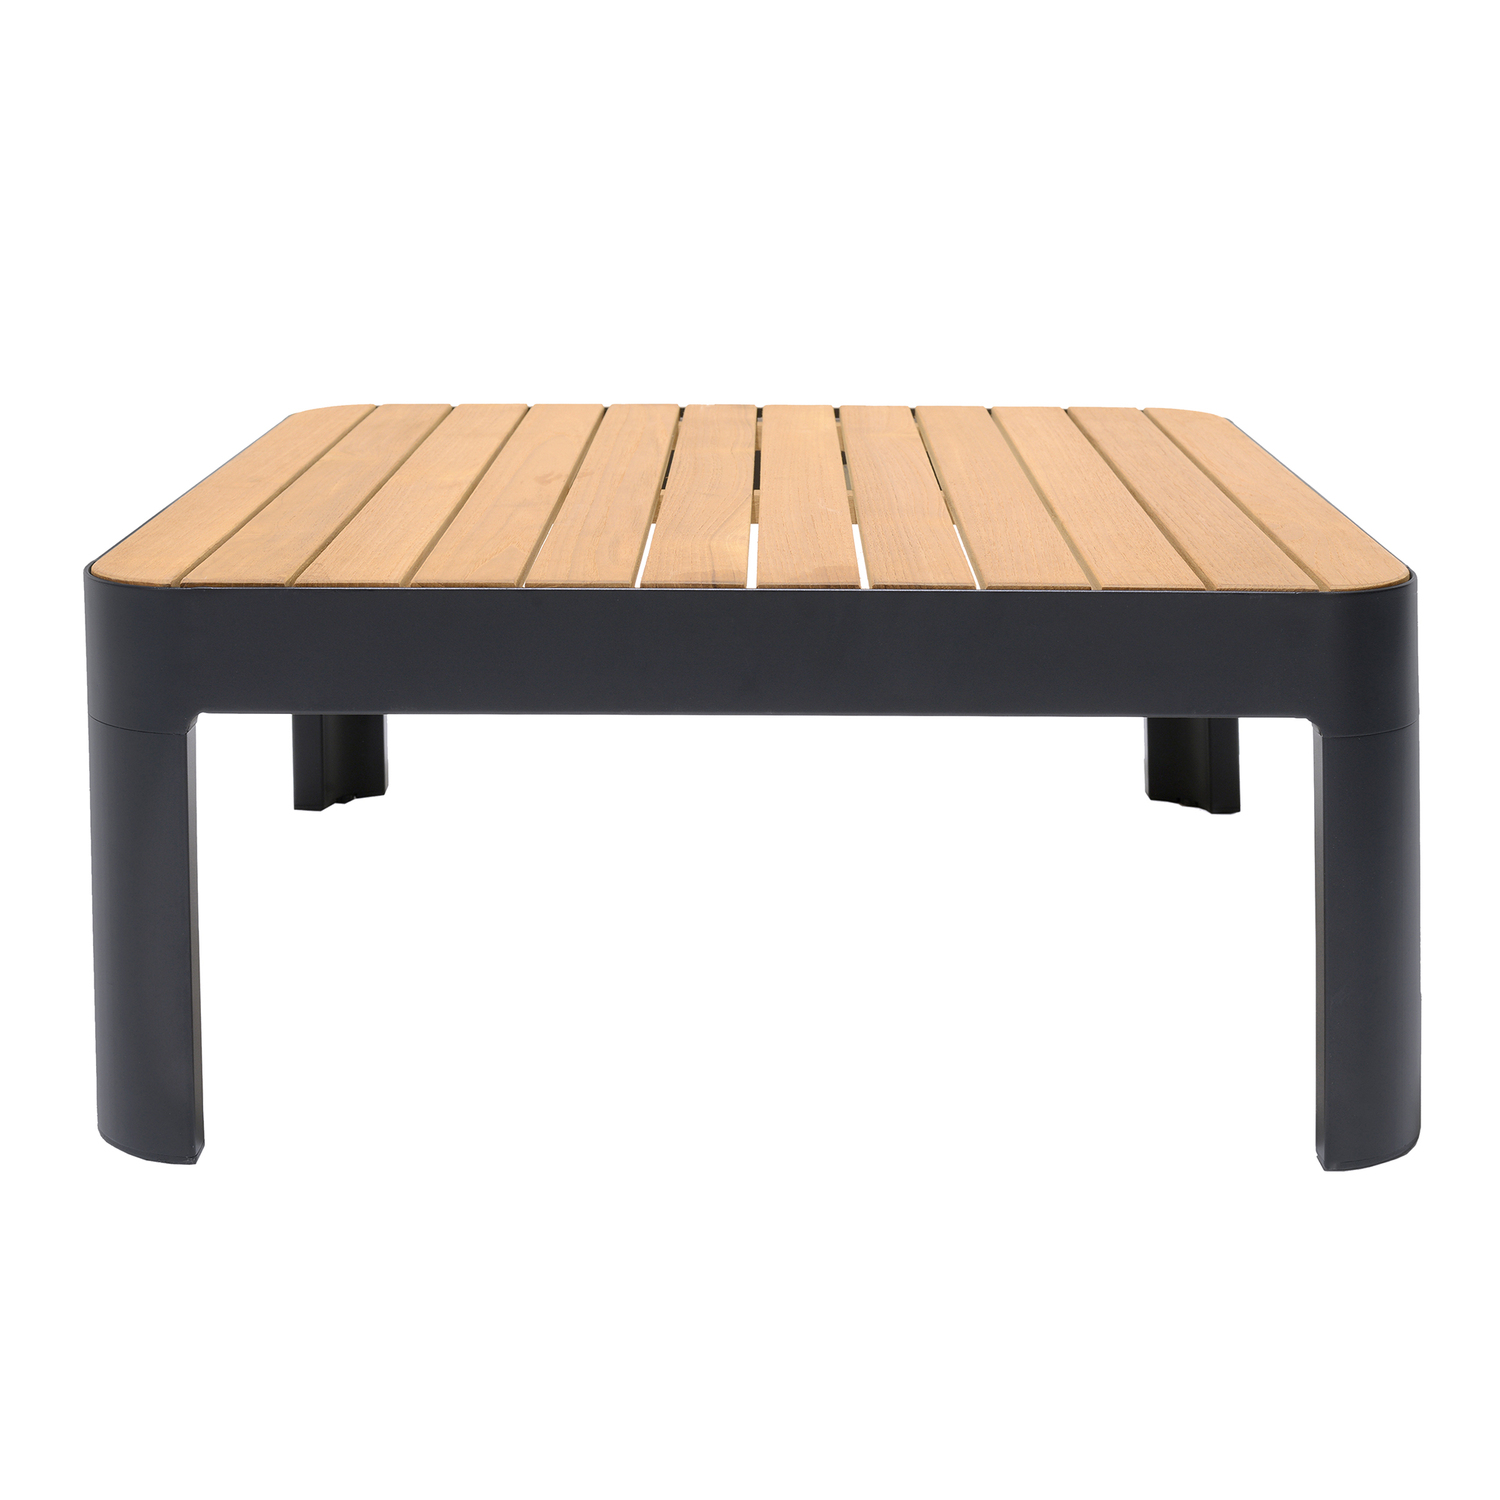 Portals Outdoor Square Coffee Table in Black Finish with Natural Teak Wood Top - image 5 of 6